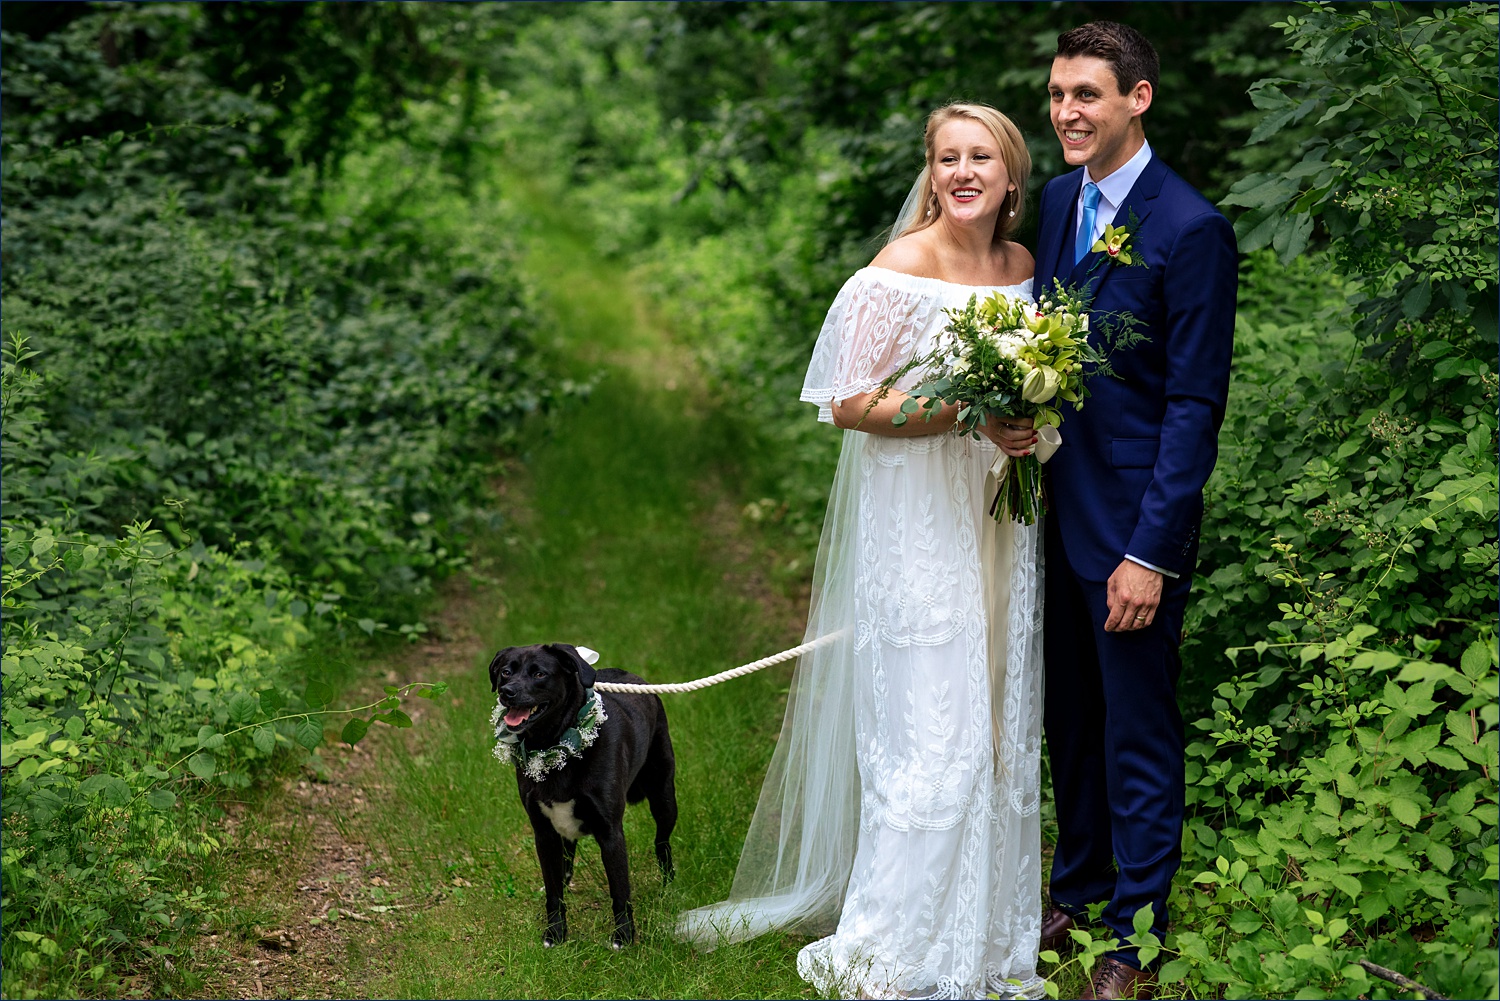 The newlyweds and their beloved dog take in some moments together on the wedding day in the woods of NH